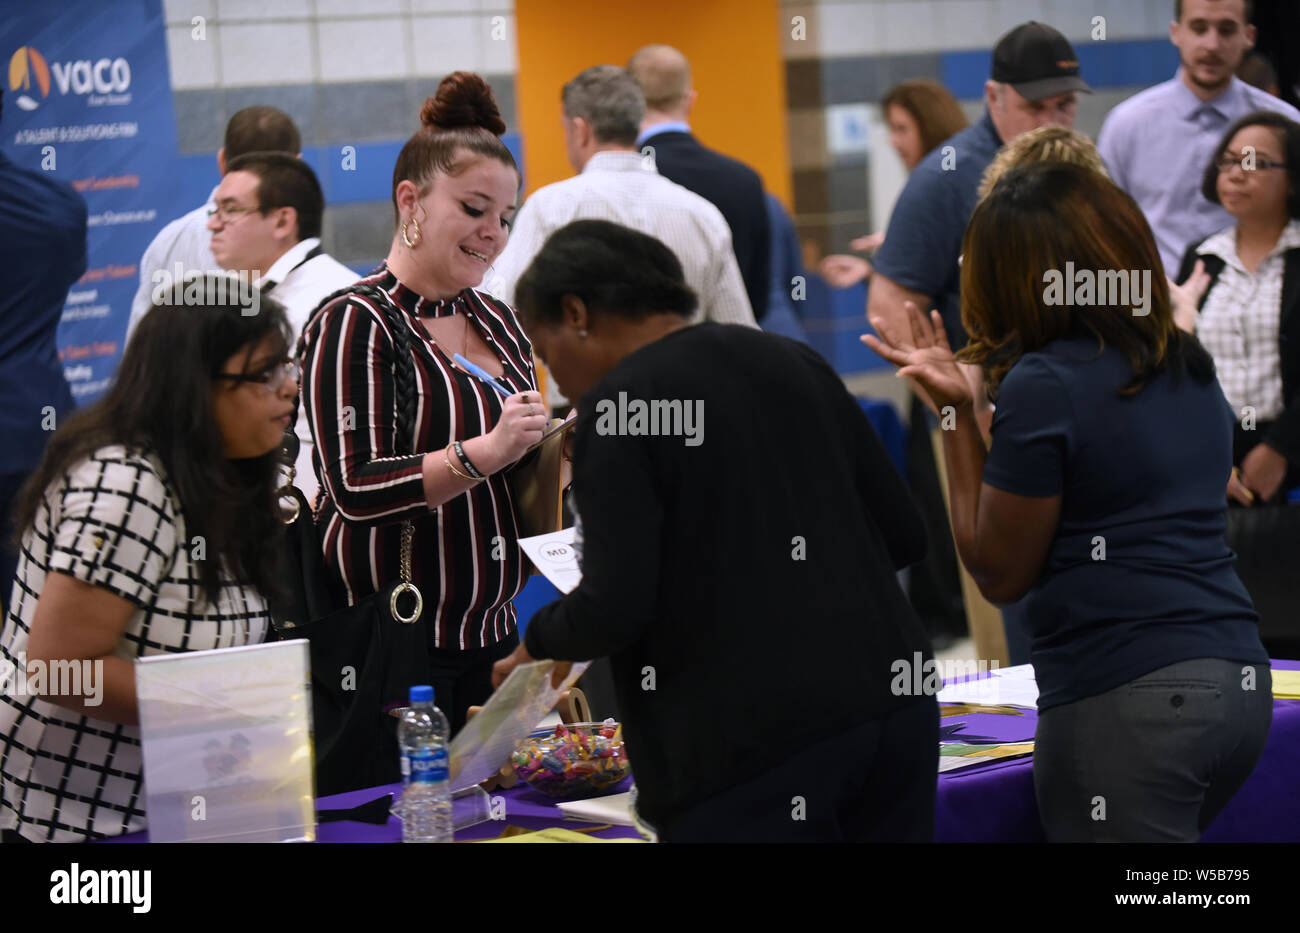 Orlando, United States. 26th July, 2019. Orlando, Florida, USA. 26th July, 2019.  People seeking employment and those looking for a better job attend the OrlandoJobs.com Job Fair at the Amway Center on July 26, 2016 in OrIando, Florida. Credit: Paul Hennessy/Alamy Live News Stock Photo